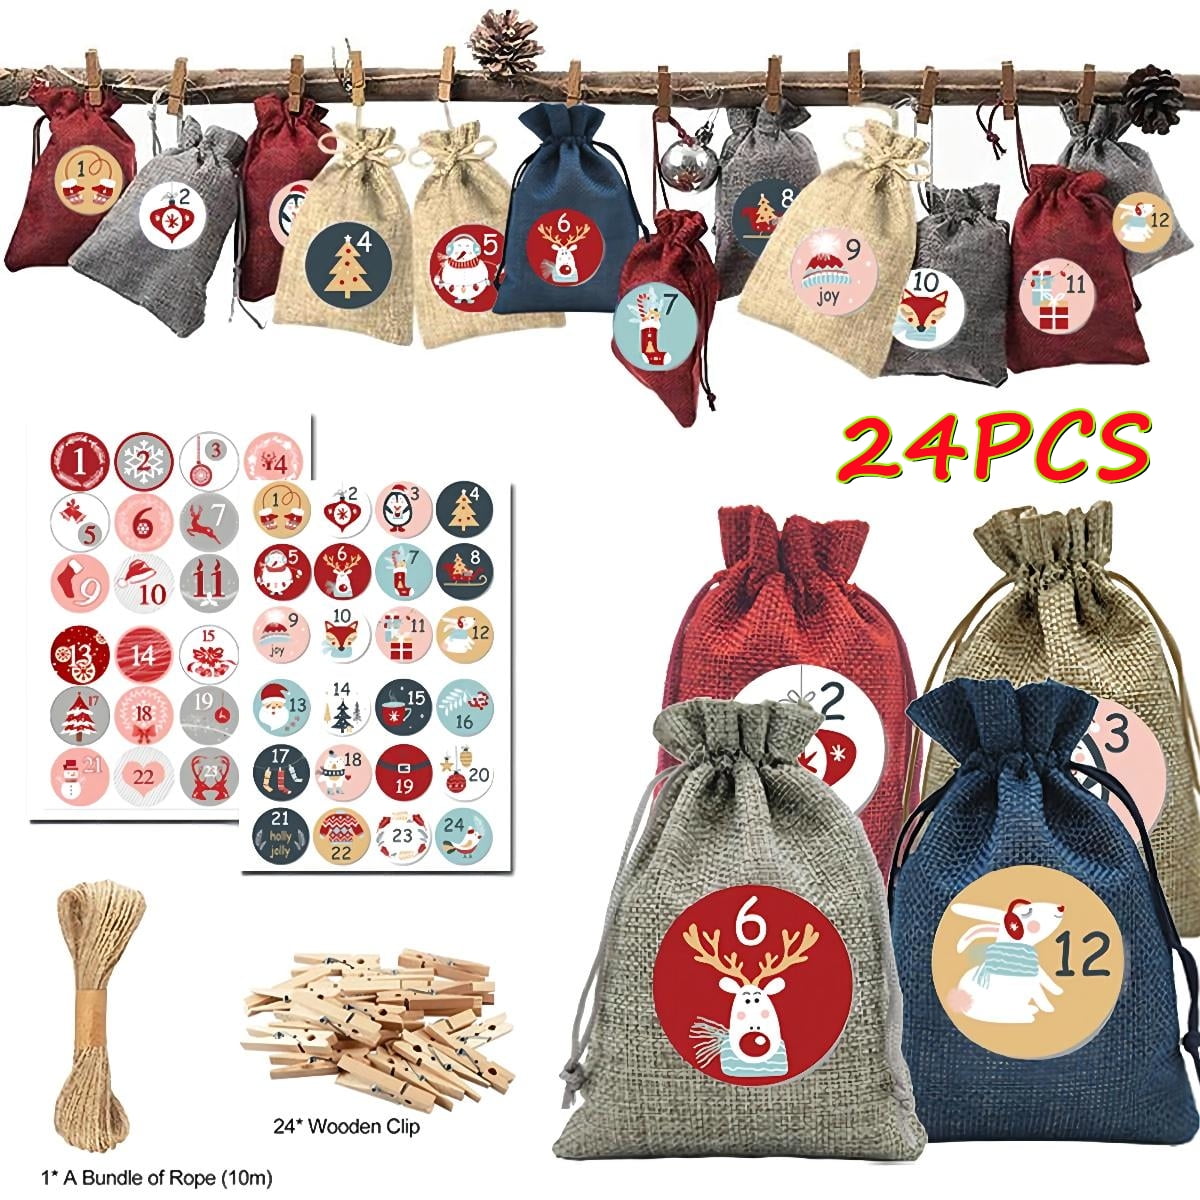 Burlap Bags Christmas Burlap Gift Bags with Drawstring Small Party ...